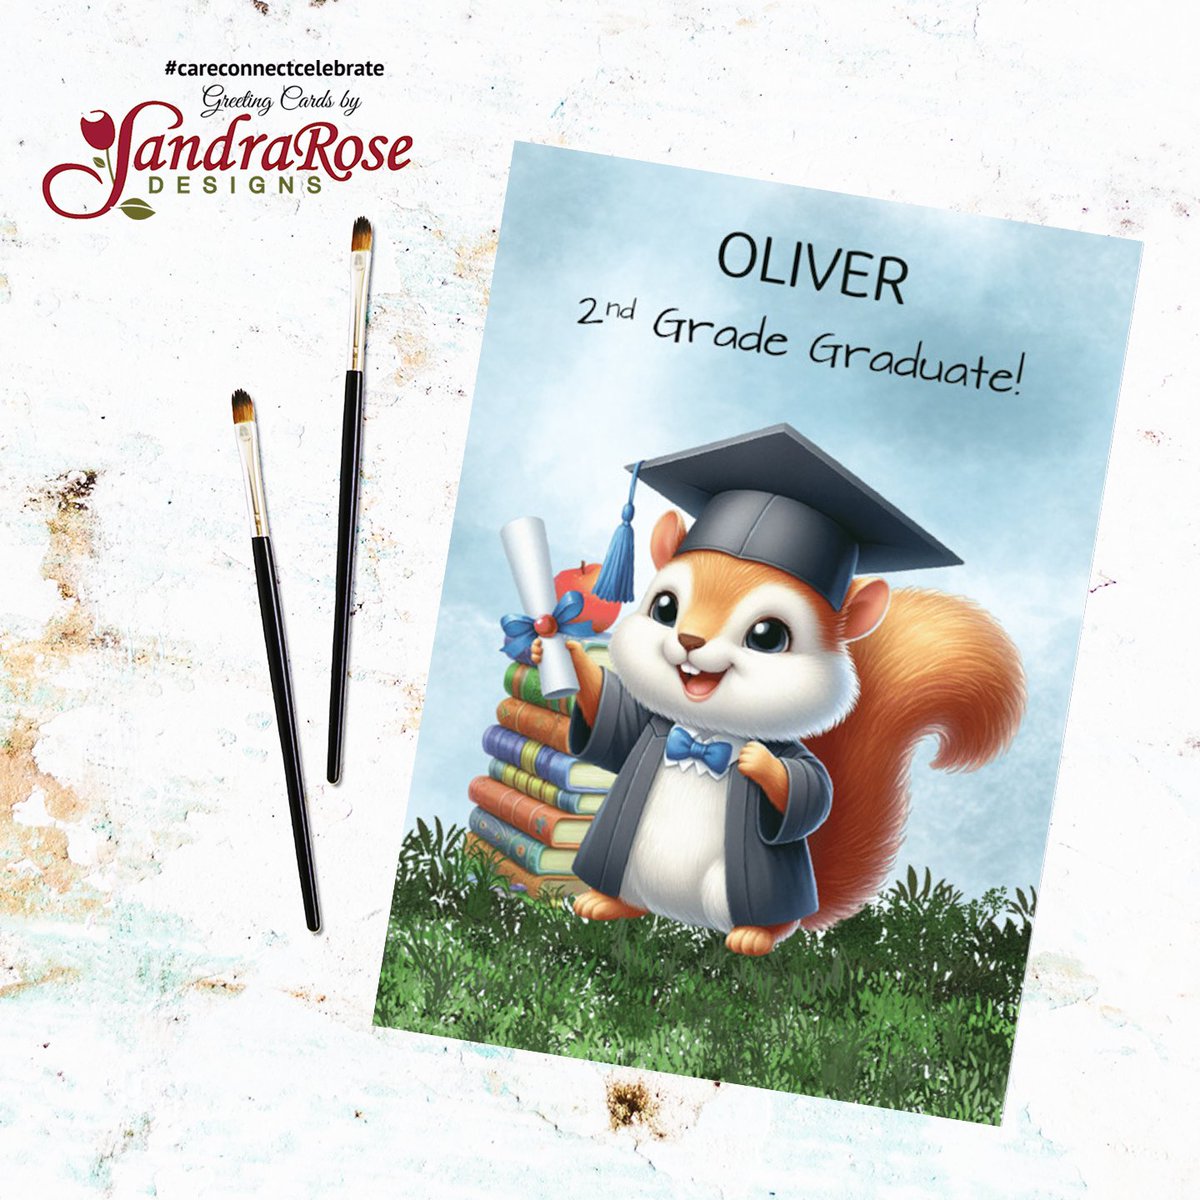 This card is a charming and personalized way to celebrate a young boy's achievement in completing second grade. With an adorable squirrel character symbolizing growth and accomplishment. #CareConnectCelebrate #SandraRoseDesigns @GCUniverse #Greetingcards greetingcarduniverse.com/occasions/cong…